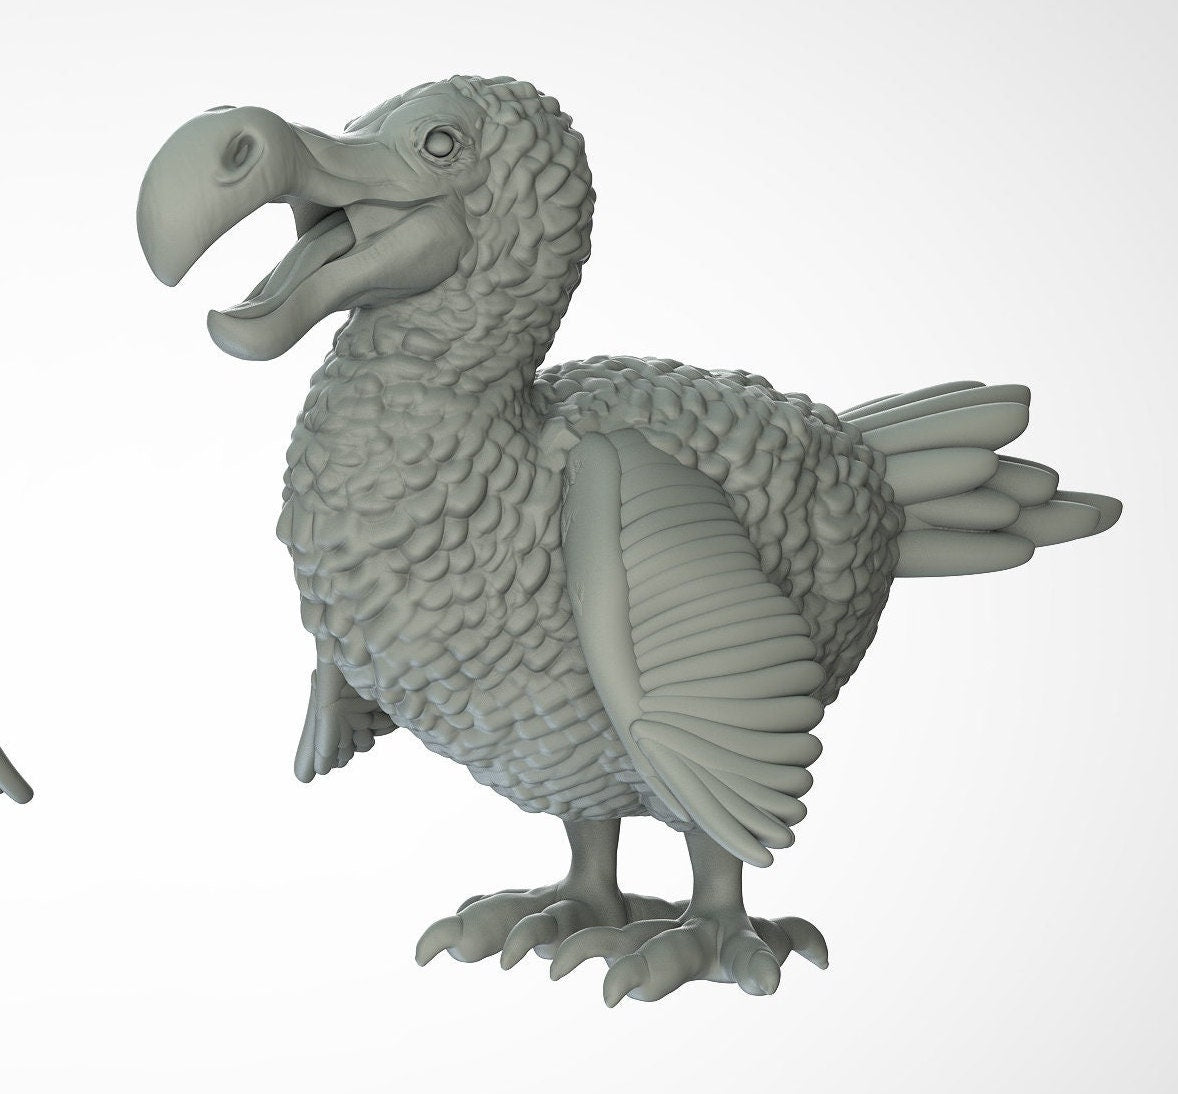 Dodo Bird Miniature - ideal for Dungeons and Dragons and other Tabletop RPGs/Wargaming/D&D